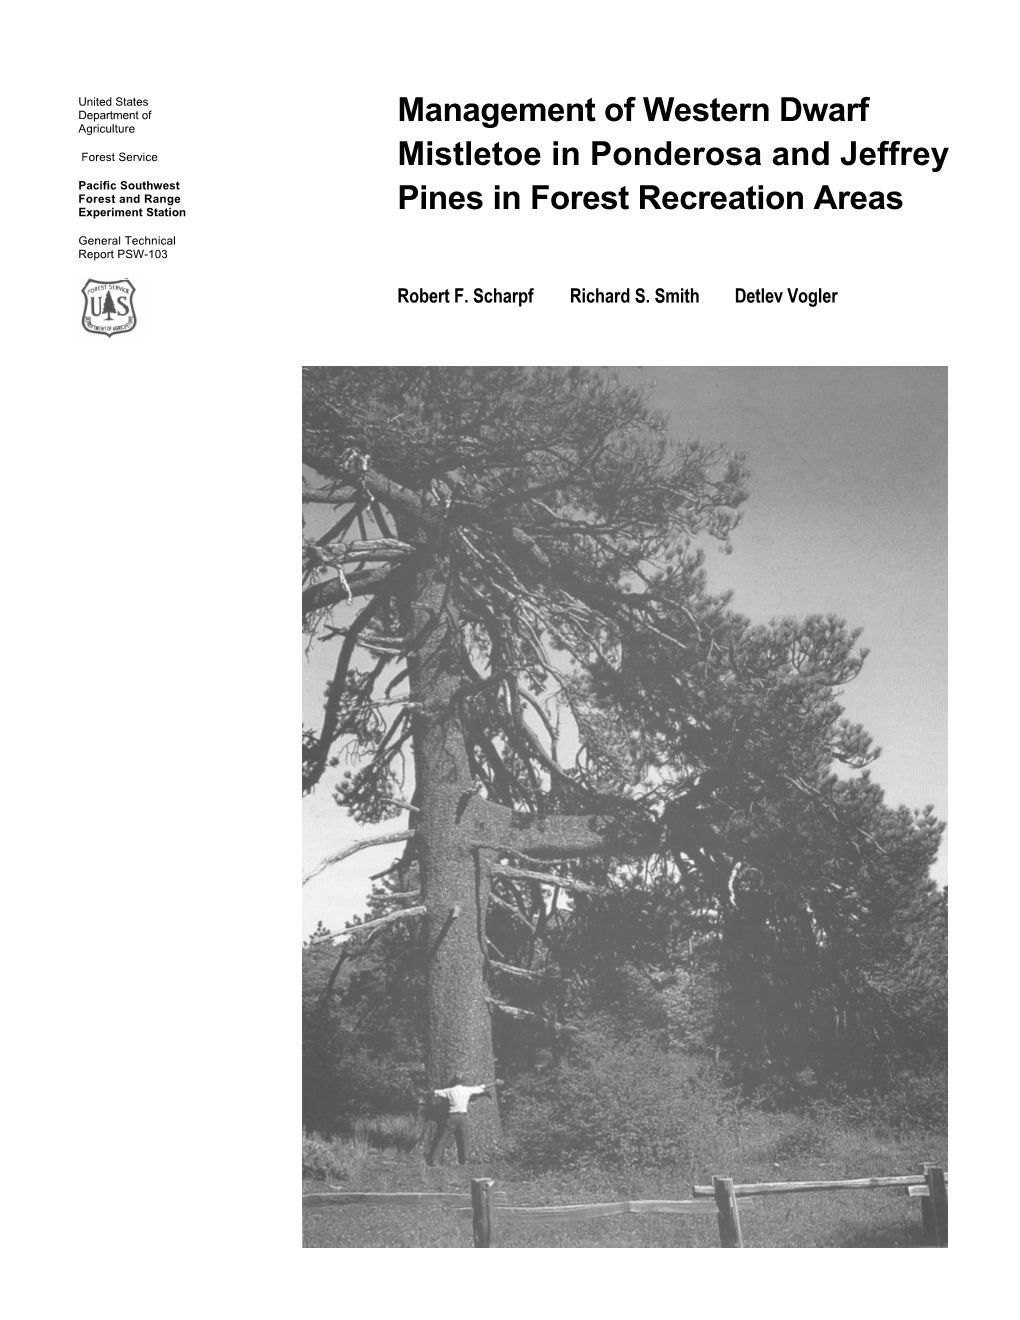 Management of Western Dwarf Mistletoe in Ponderosa and Jeffrey Pines in Forest Recreation Areas